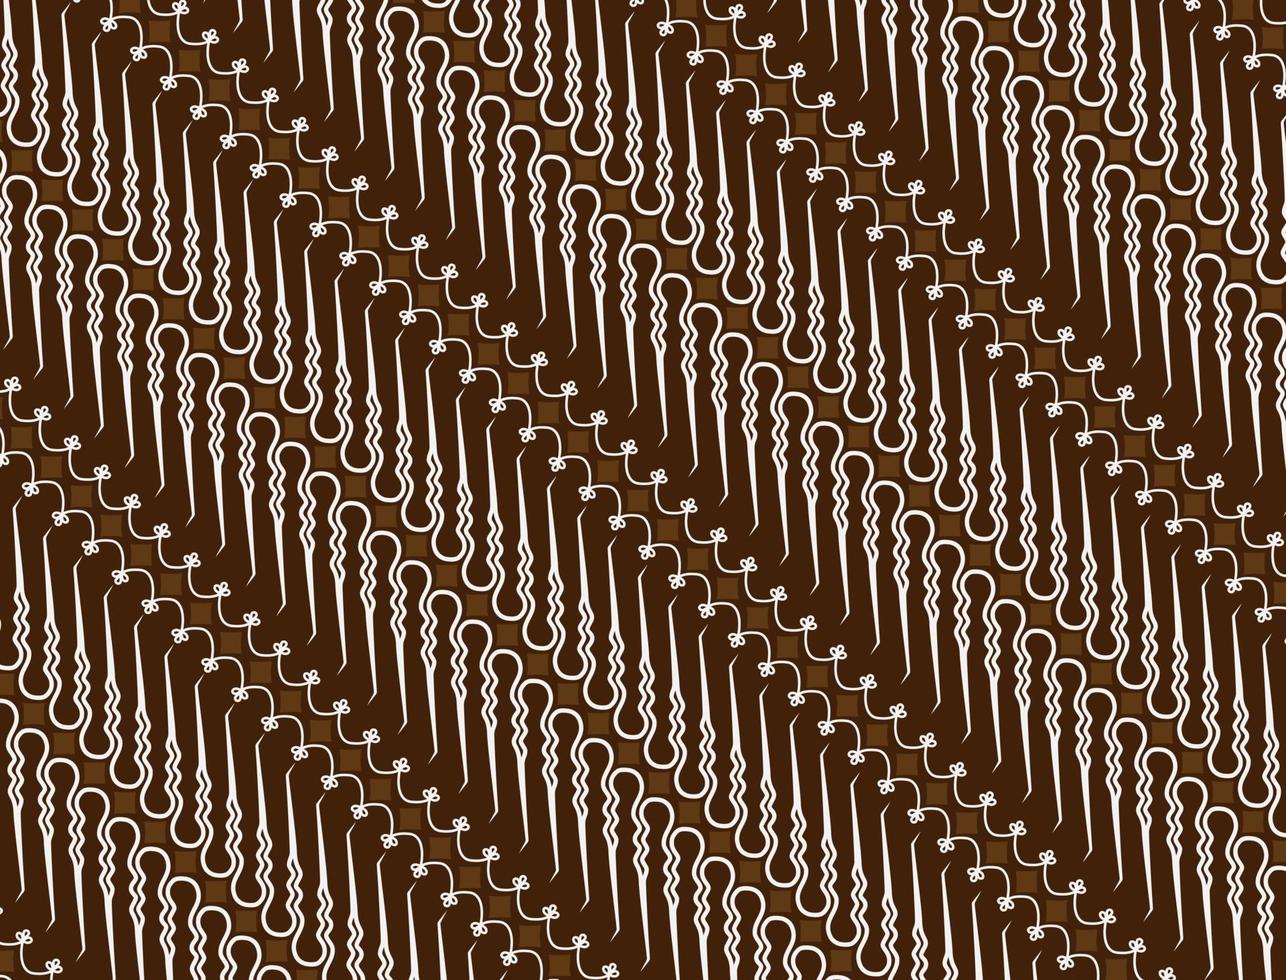 Batik background with a combination of brown and white vector